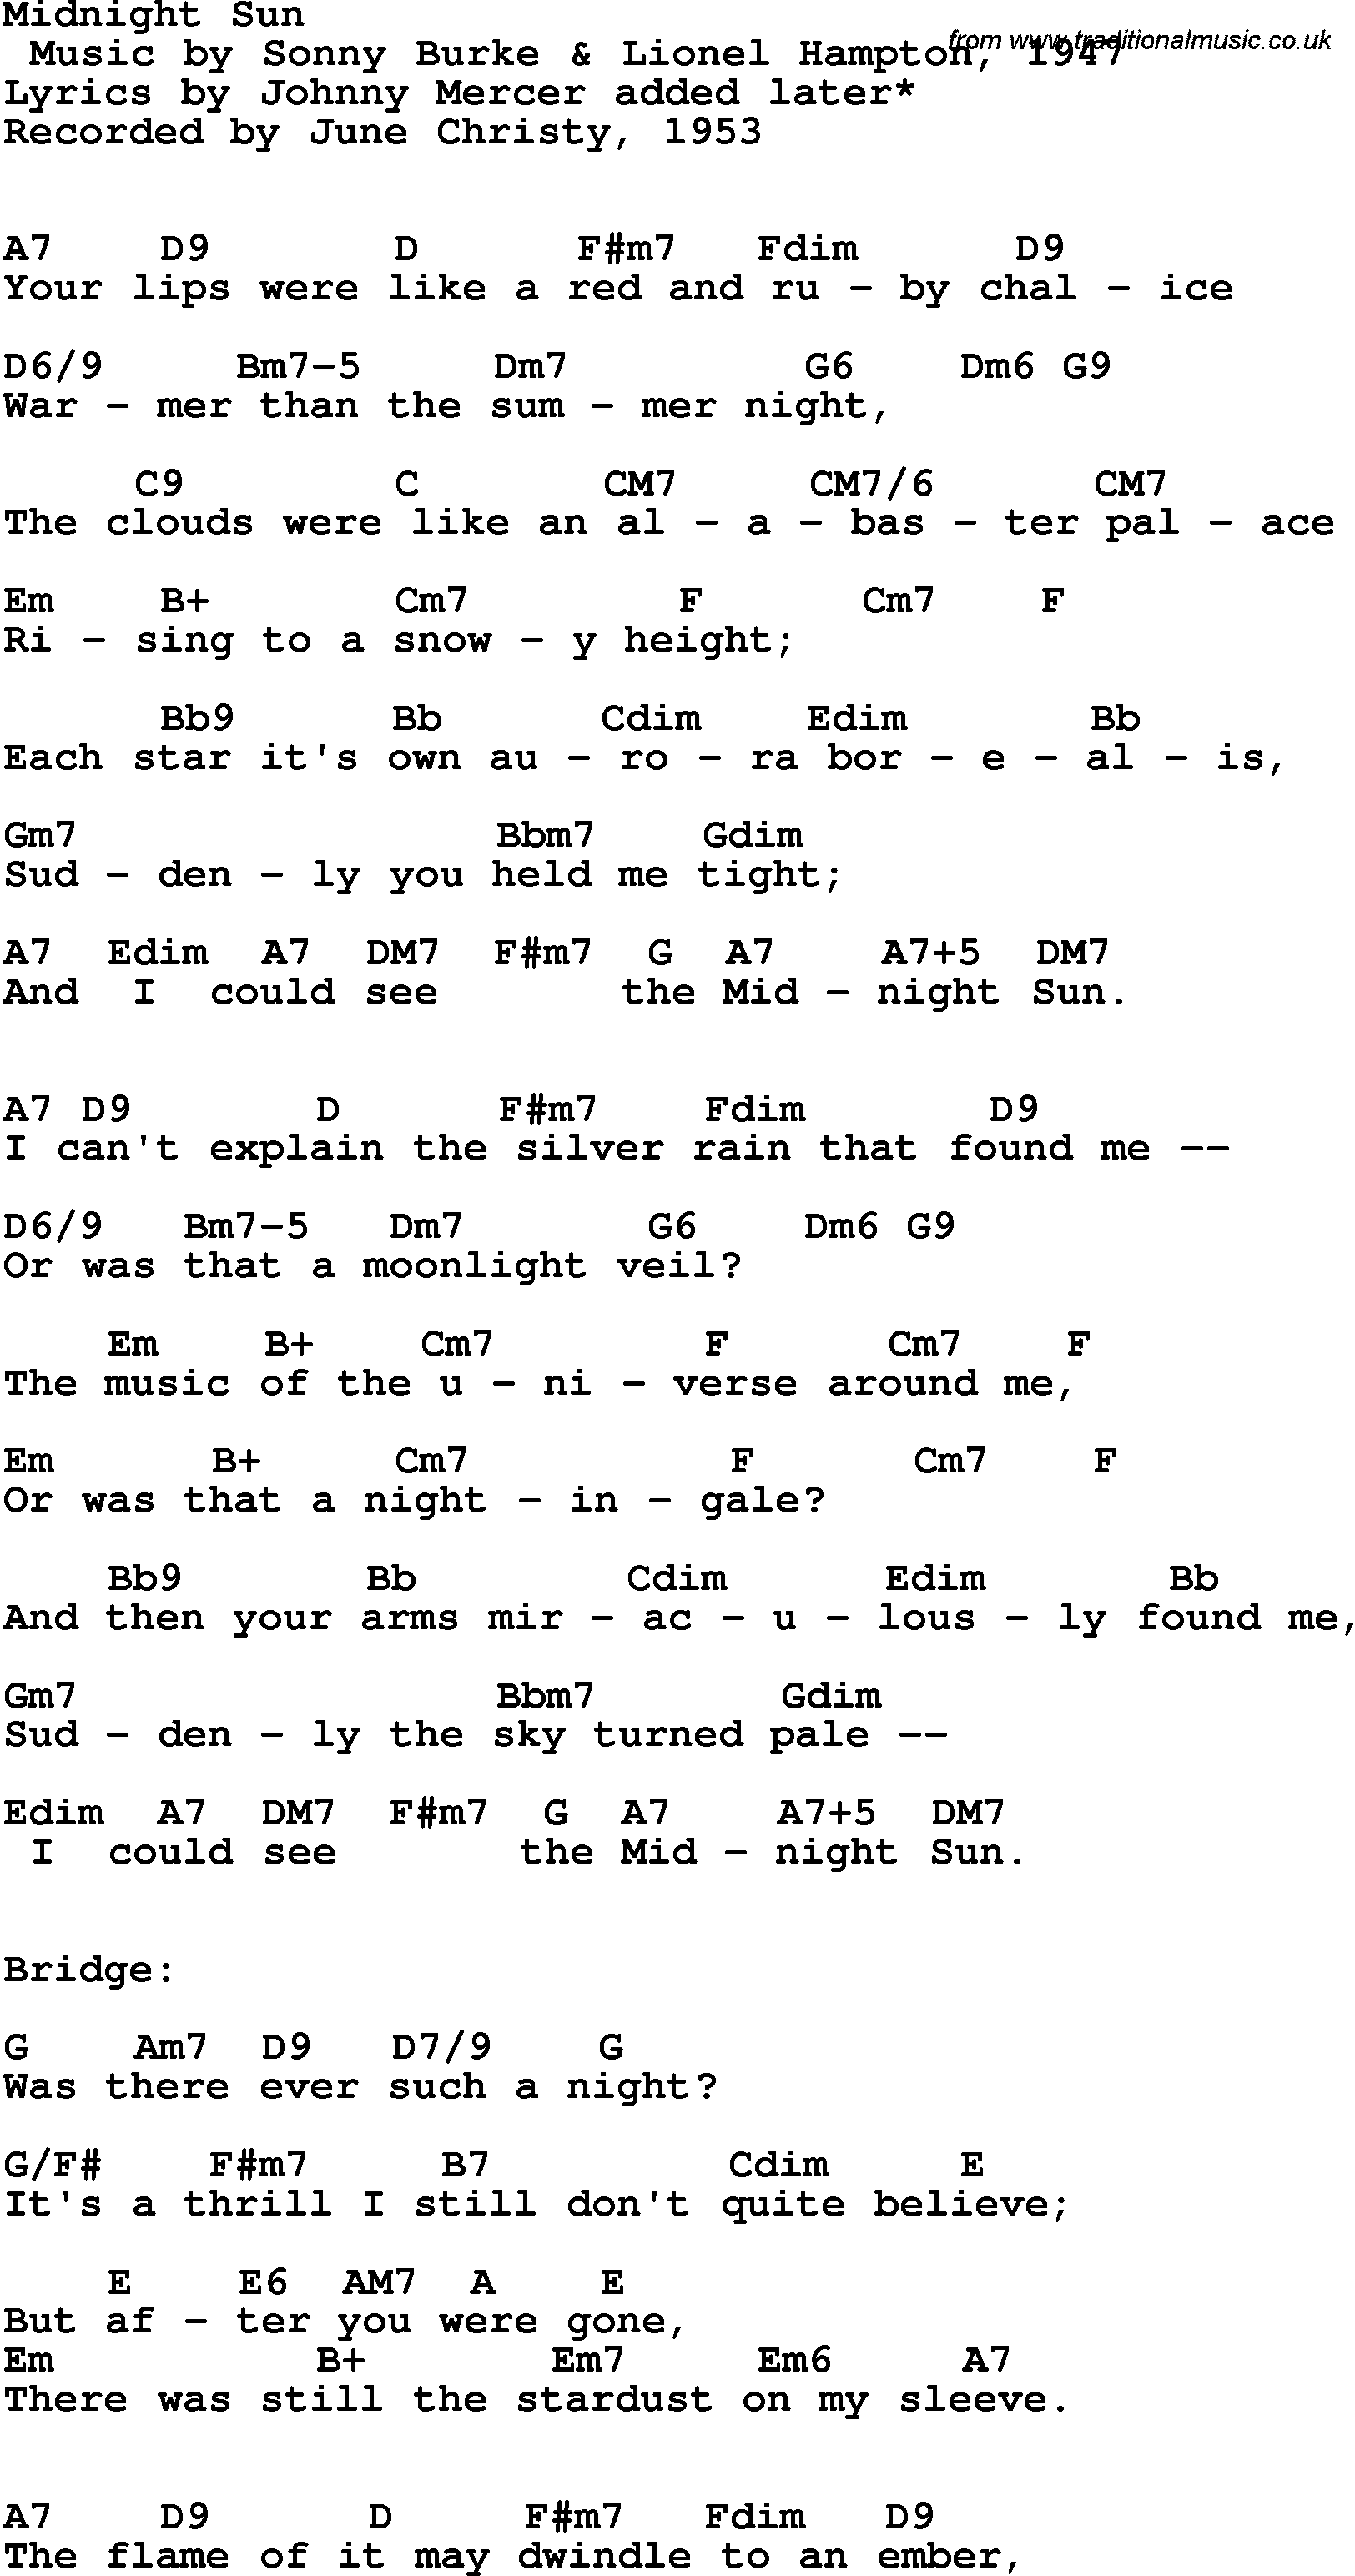 Song Lyrics with guitar chords for Midnight Sun - June Christy, 1953